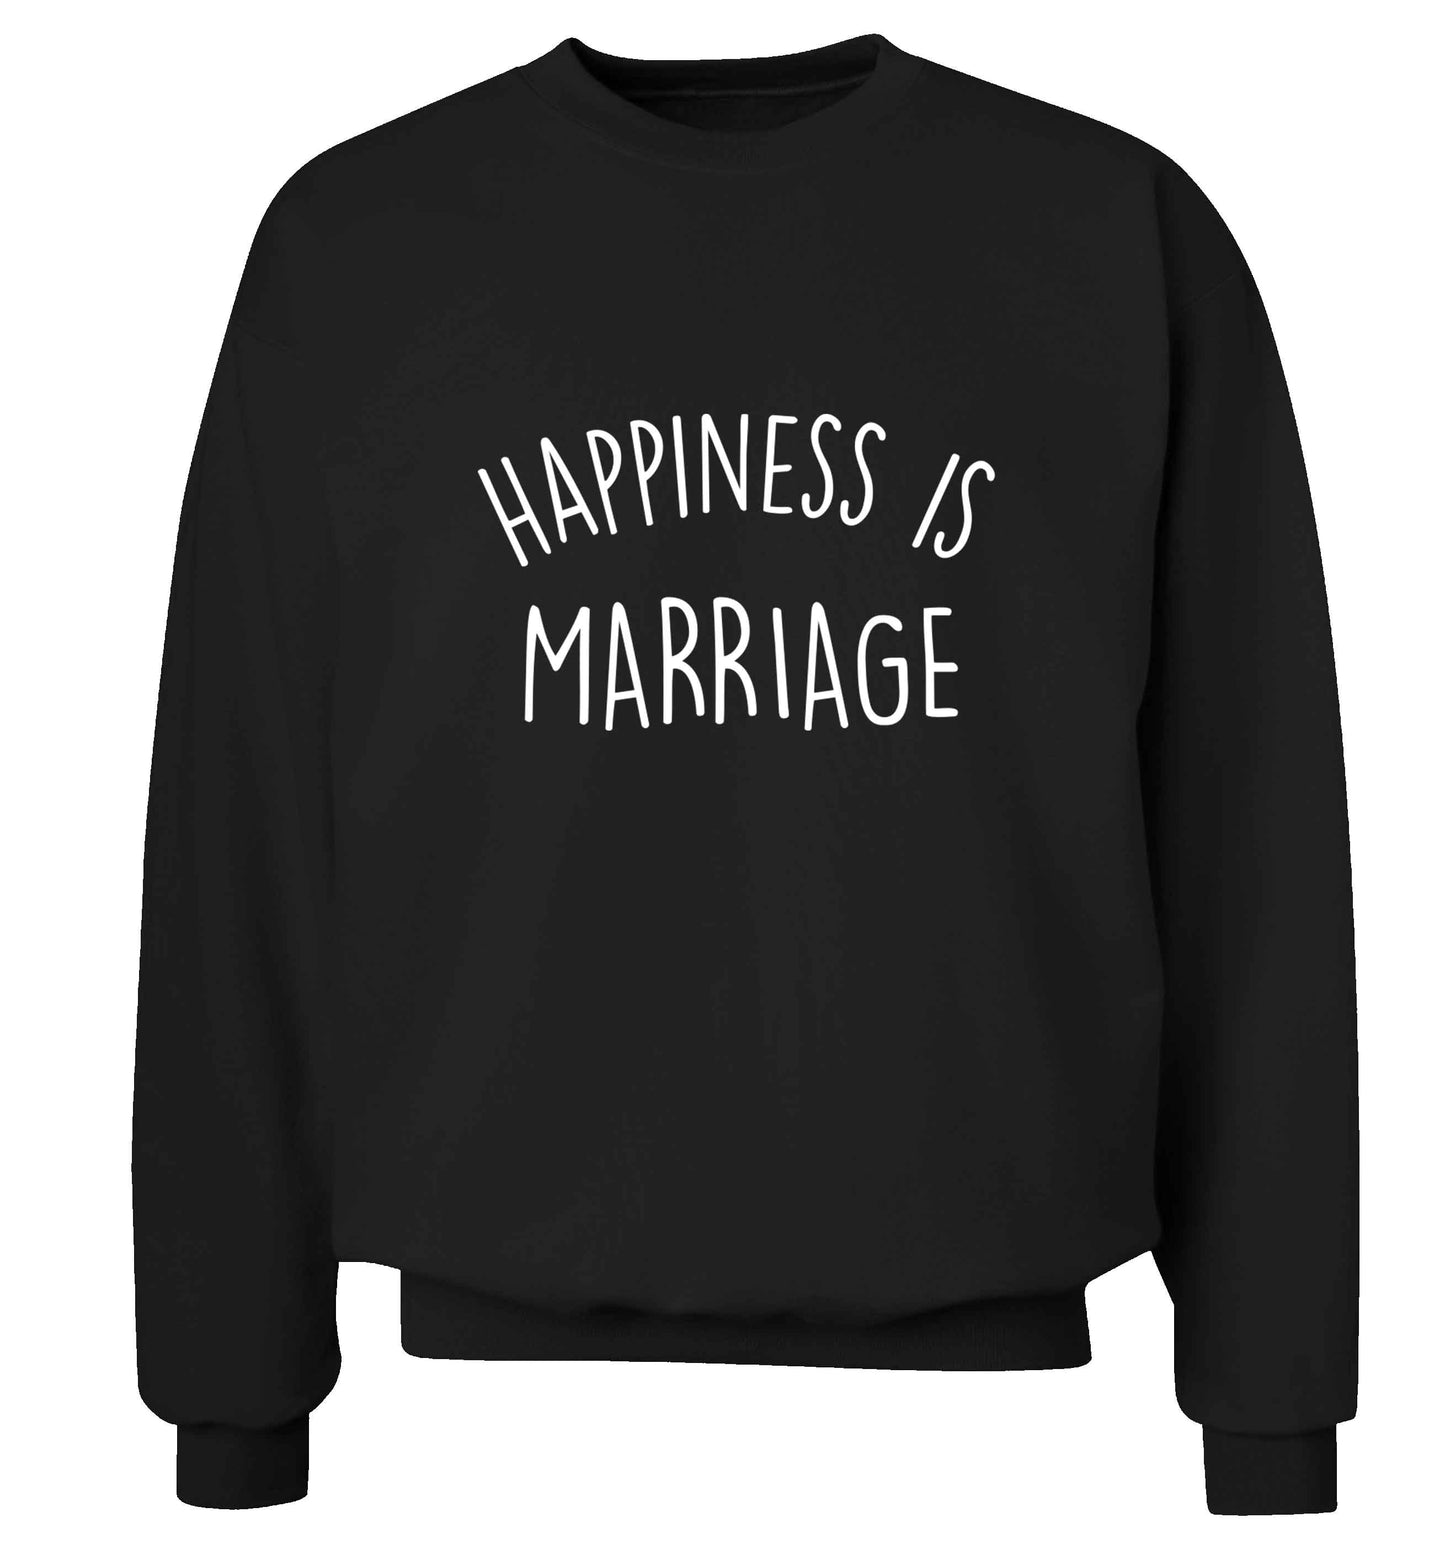 Happiness is marriage adult's unisex black sweater 2XL